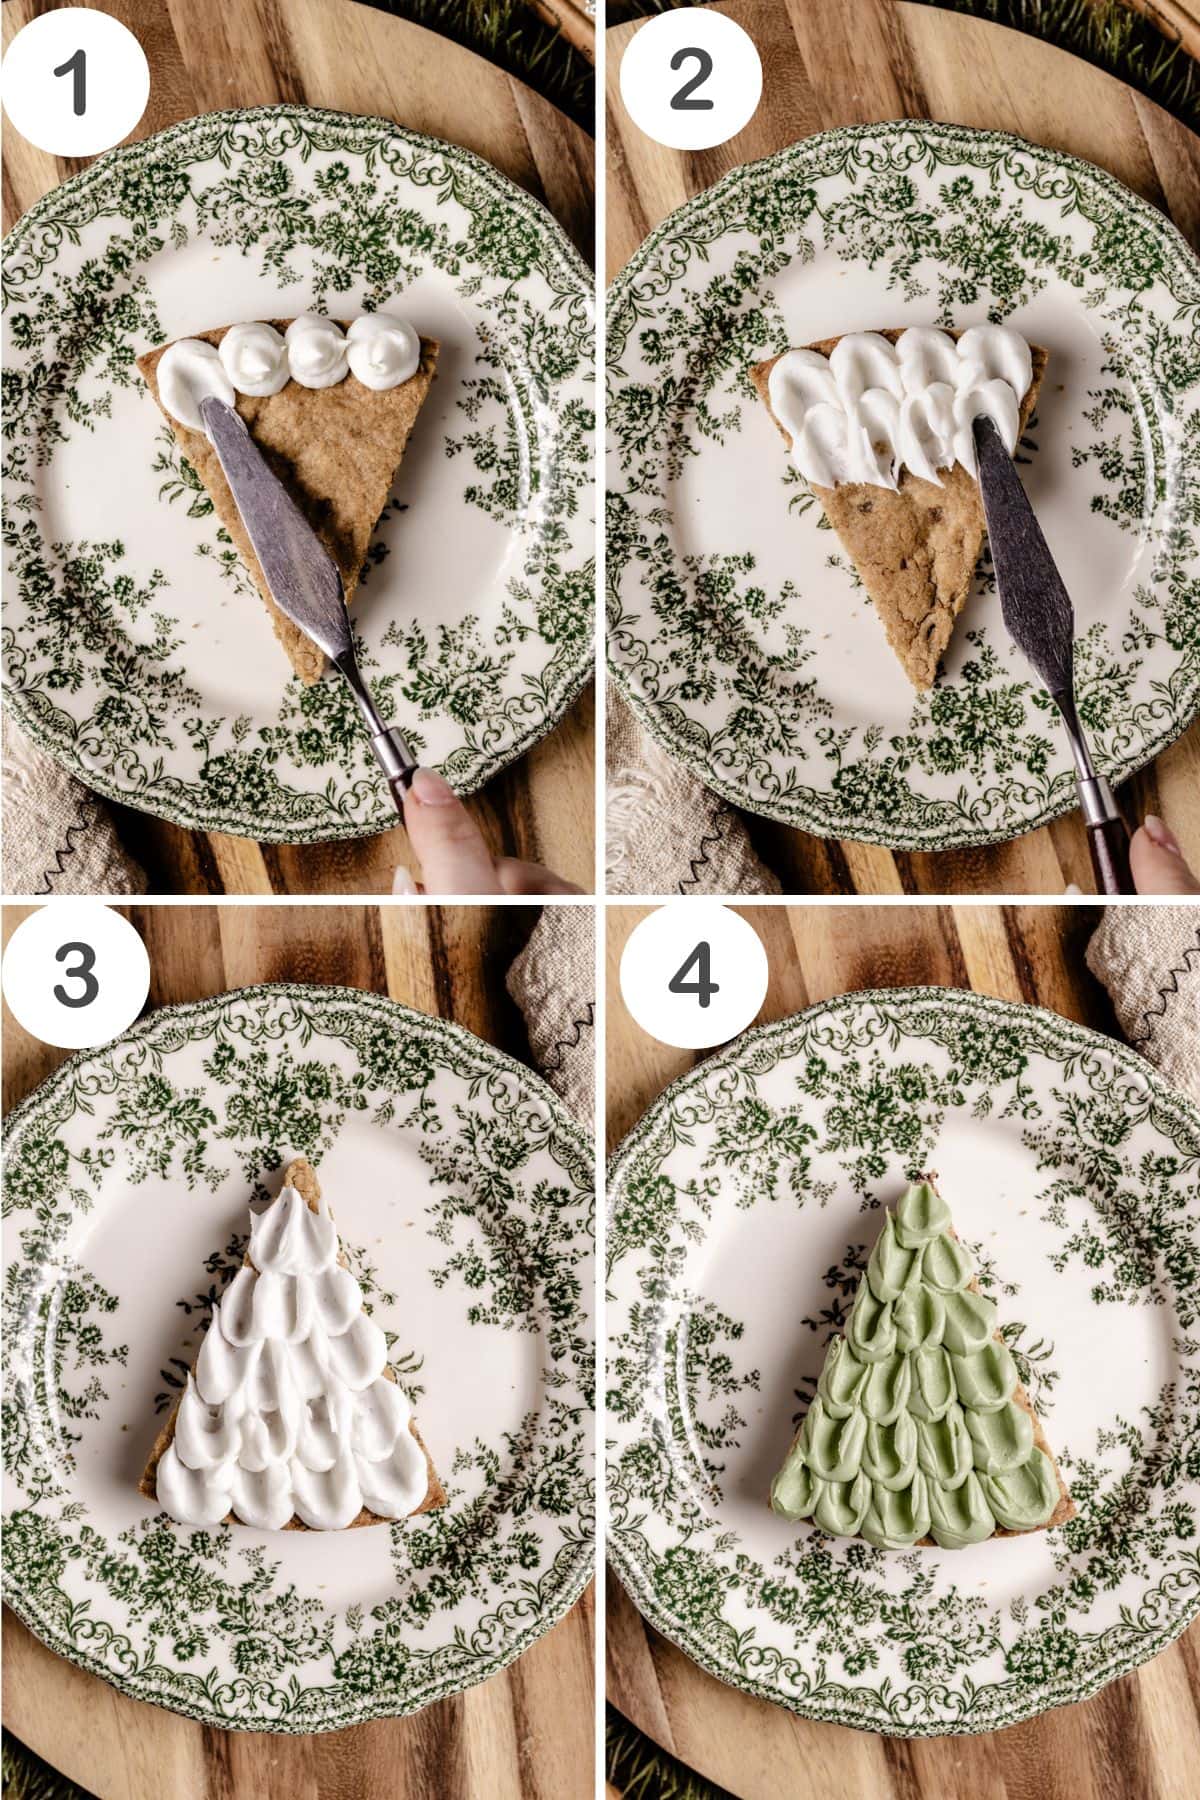 numbered step by step photos showing how to decorate the gluten free christmas cookies